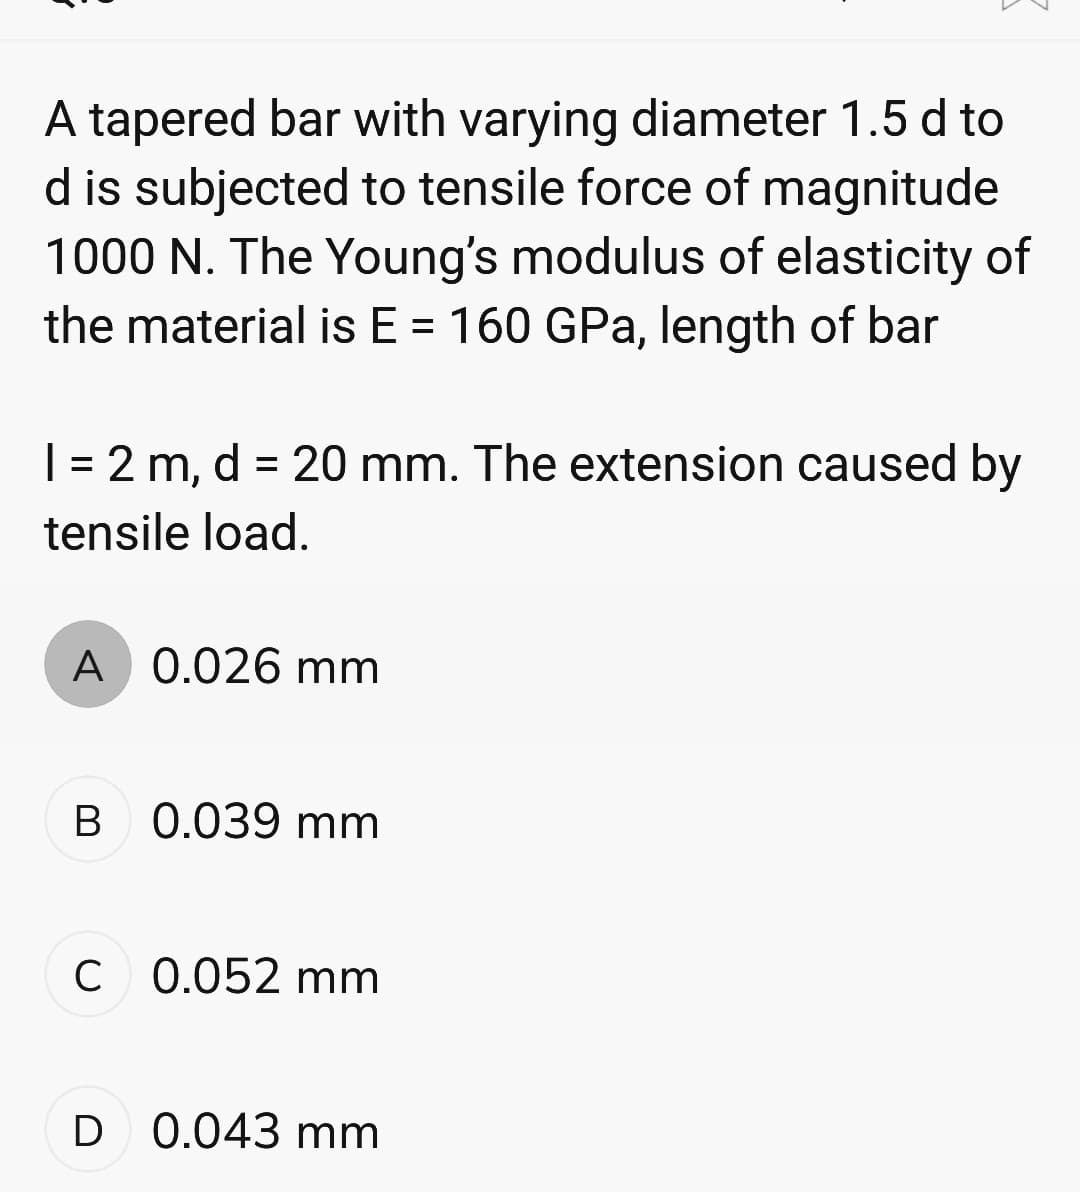 A tapered bar with varying diameter 1.5 d to
d is subjected to tensile force of magnitude
1000 N. The Young's modulus of elasticity of
the material is E = 160 GPa, length of bar
1 = 2 m, d = 20 mm. The extension caused by
tensile load.
A 0.026 mm
B
0.039 mm
C 0.052 mm
D 0.043 mm